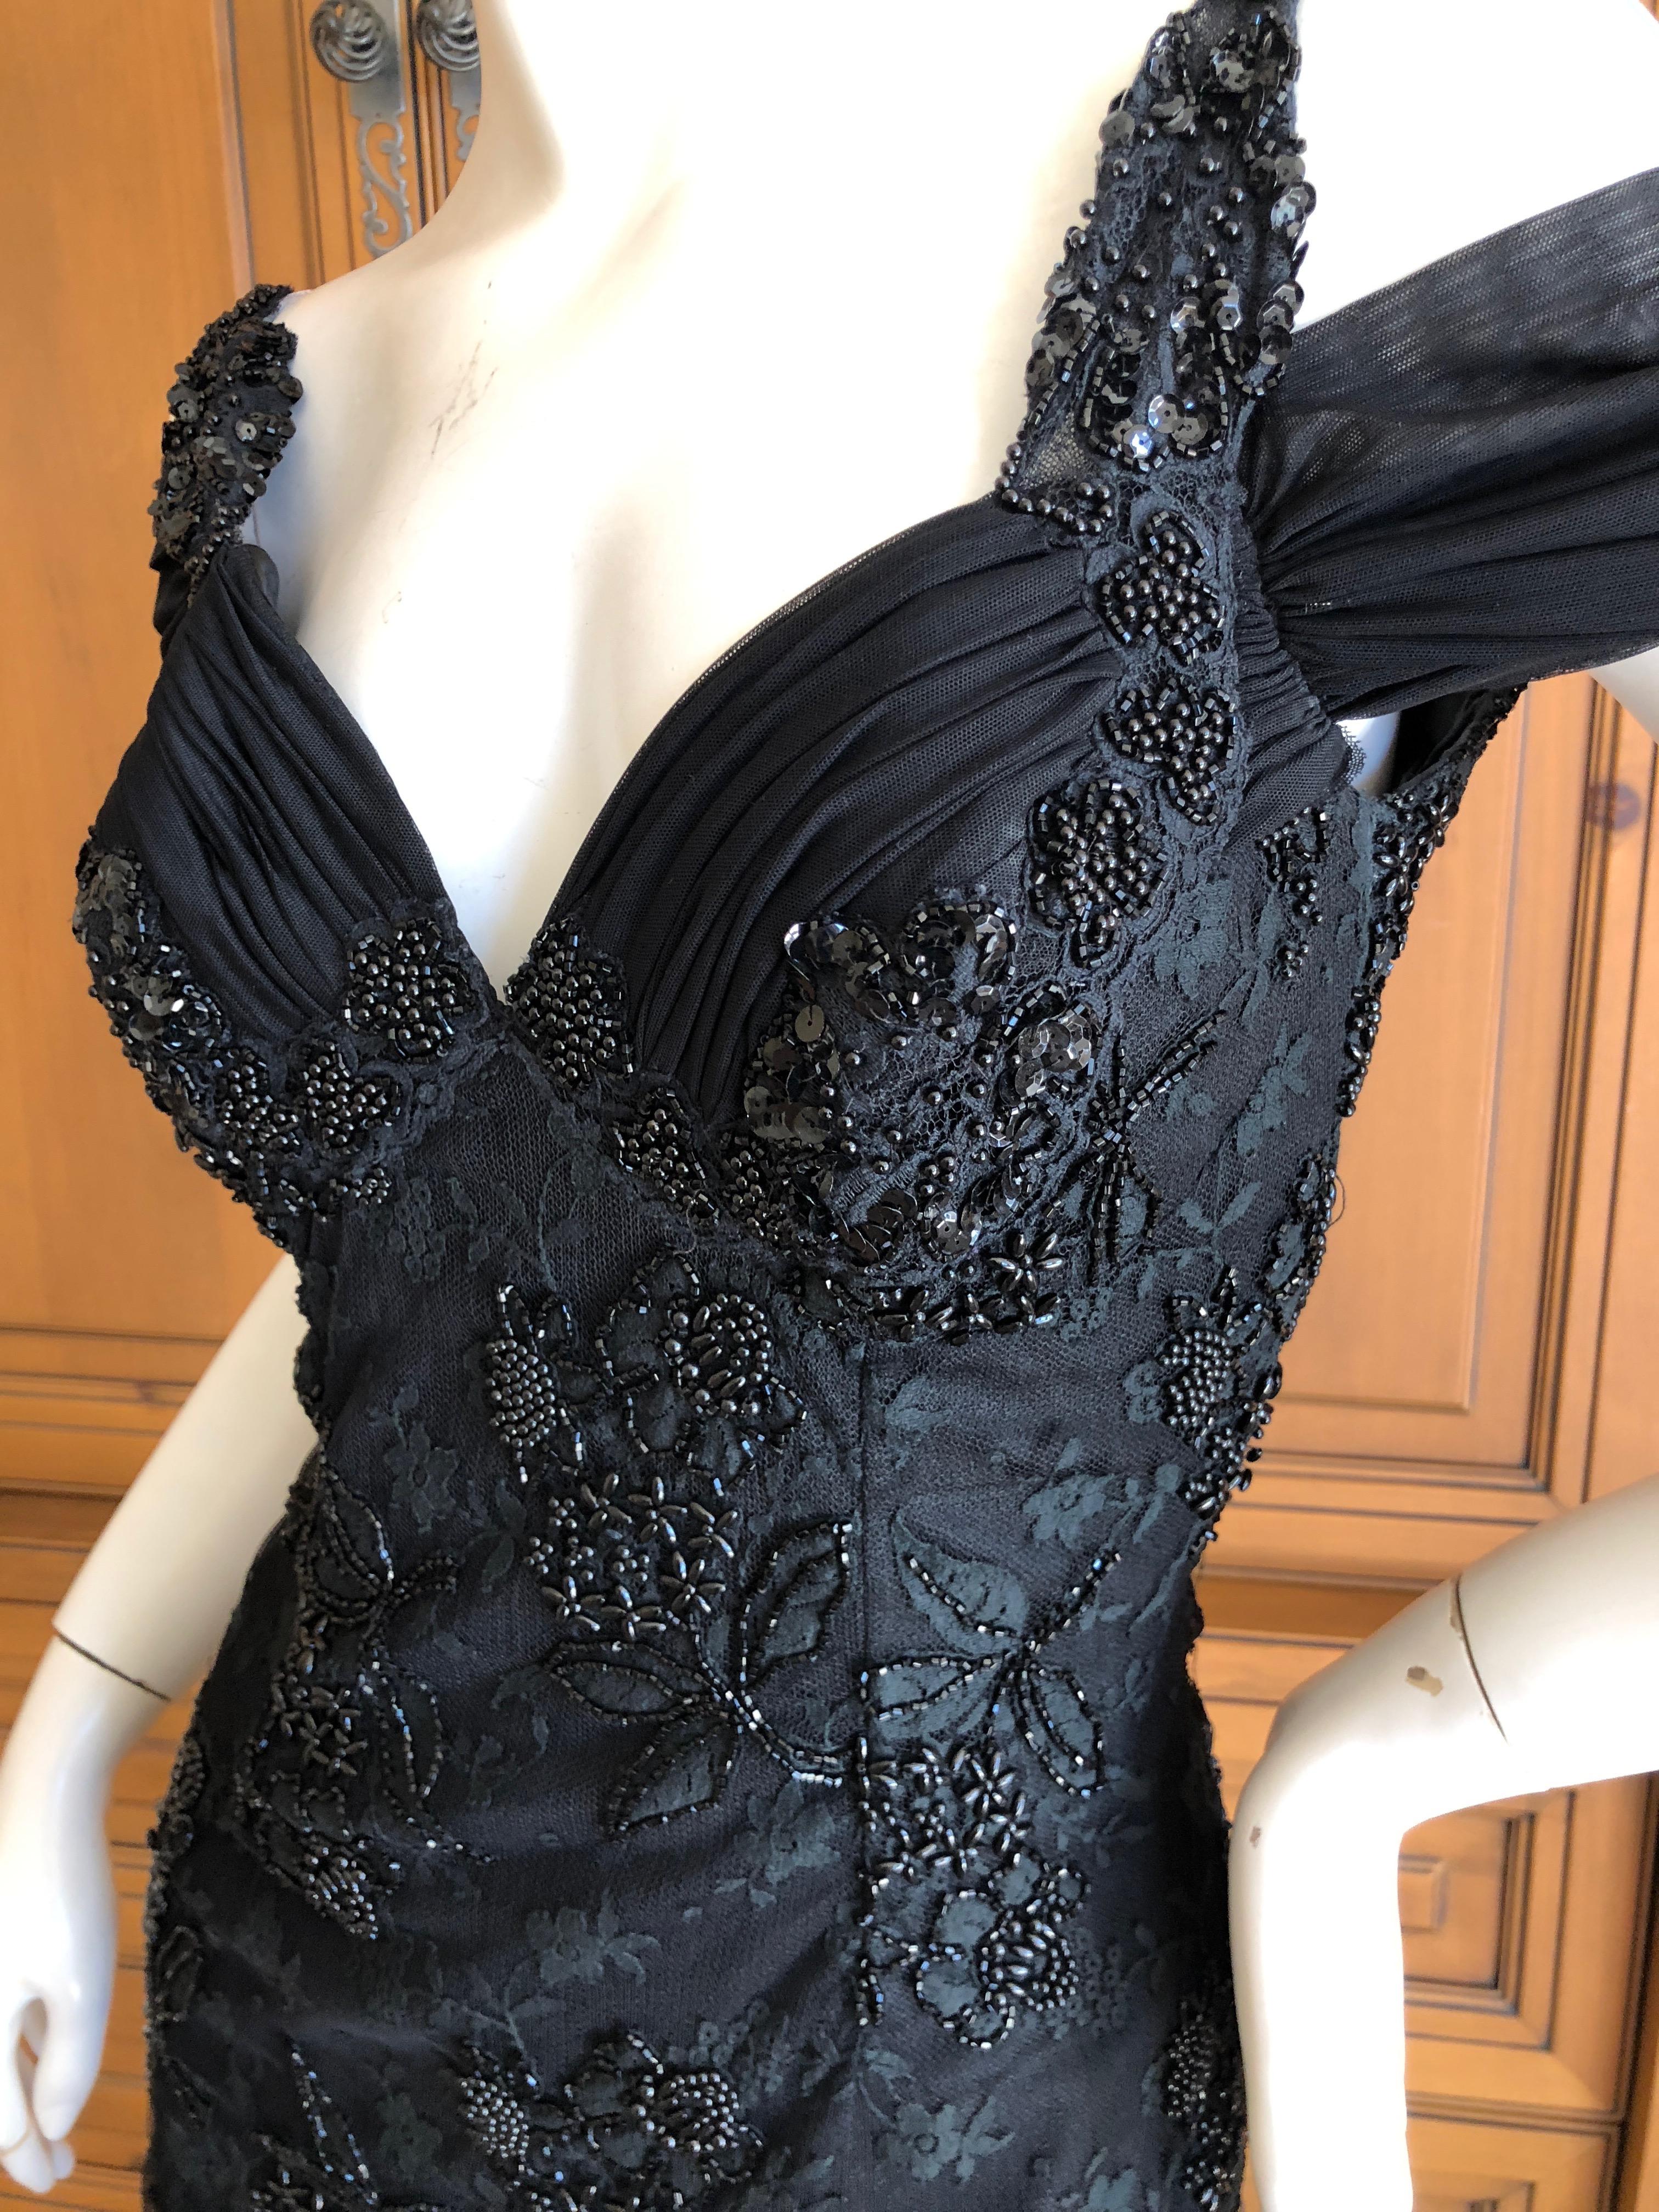 Women's or Men's Vicky Tiel Couture Paris Bergdorf Goodman 1980's Beaded Evening Cocktail Dress For Sale